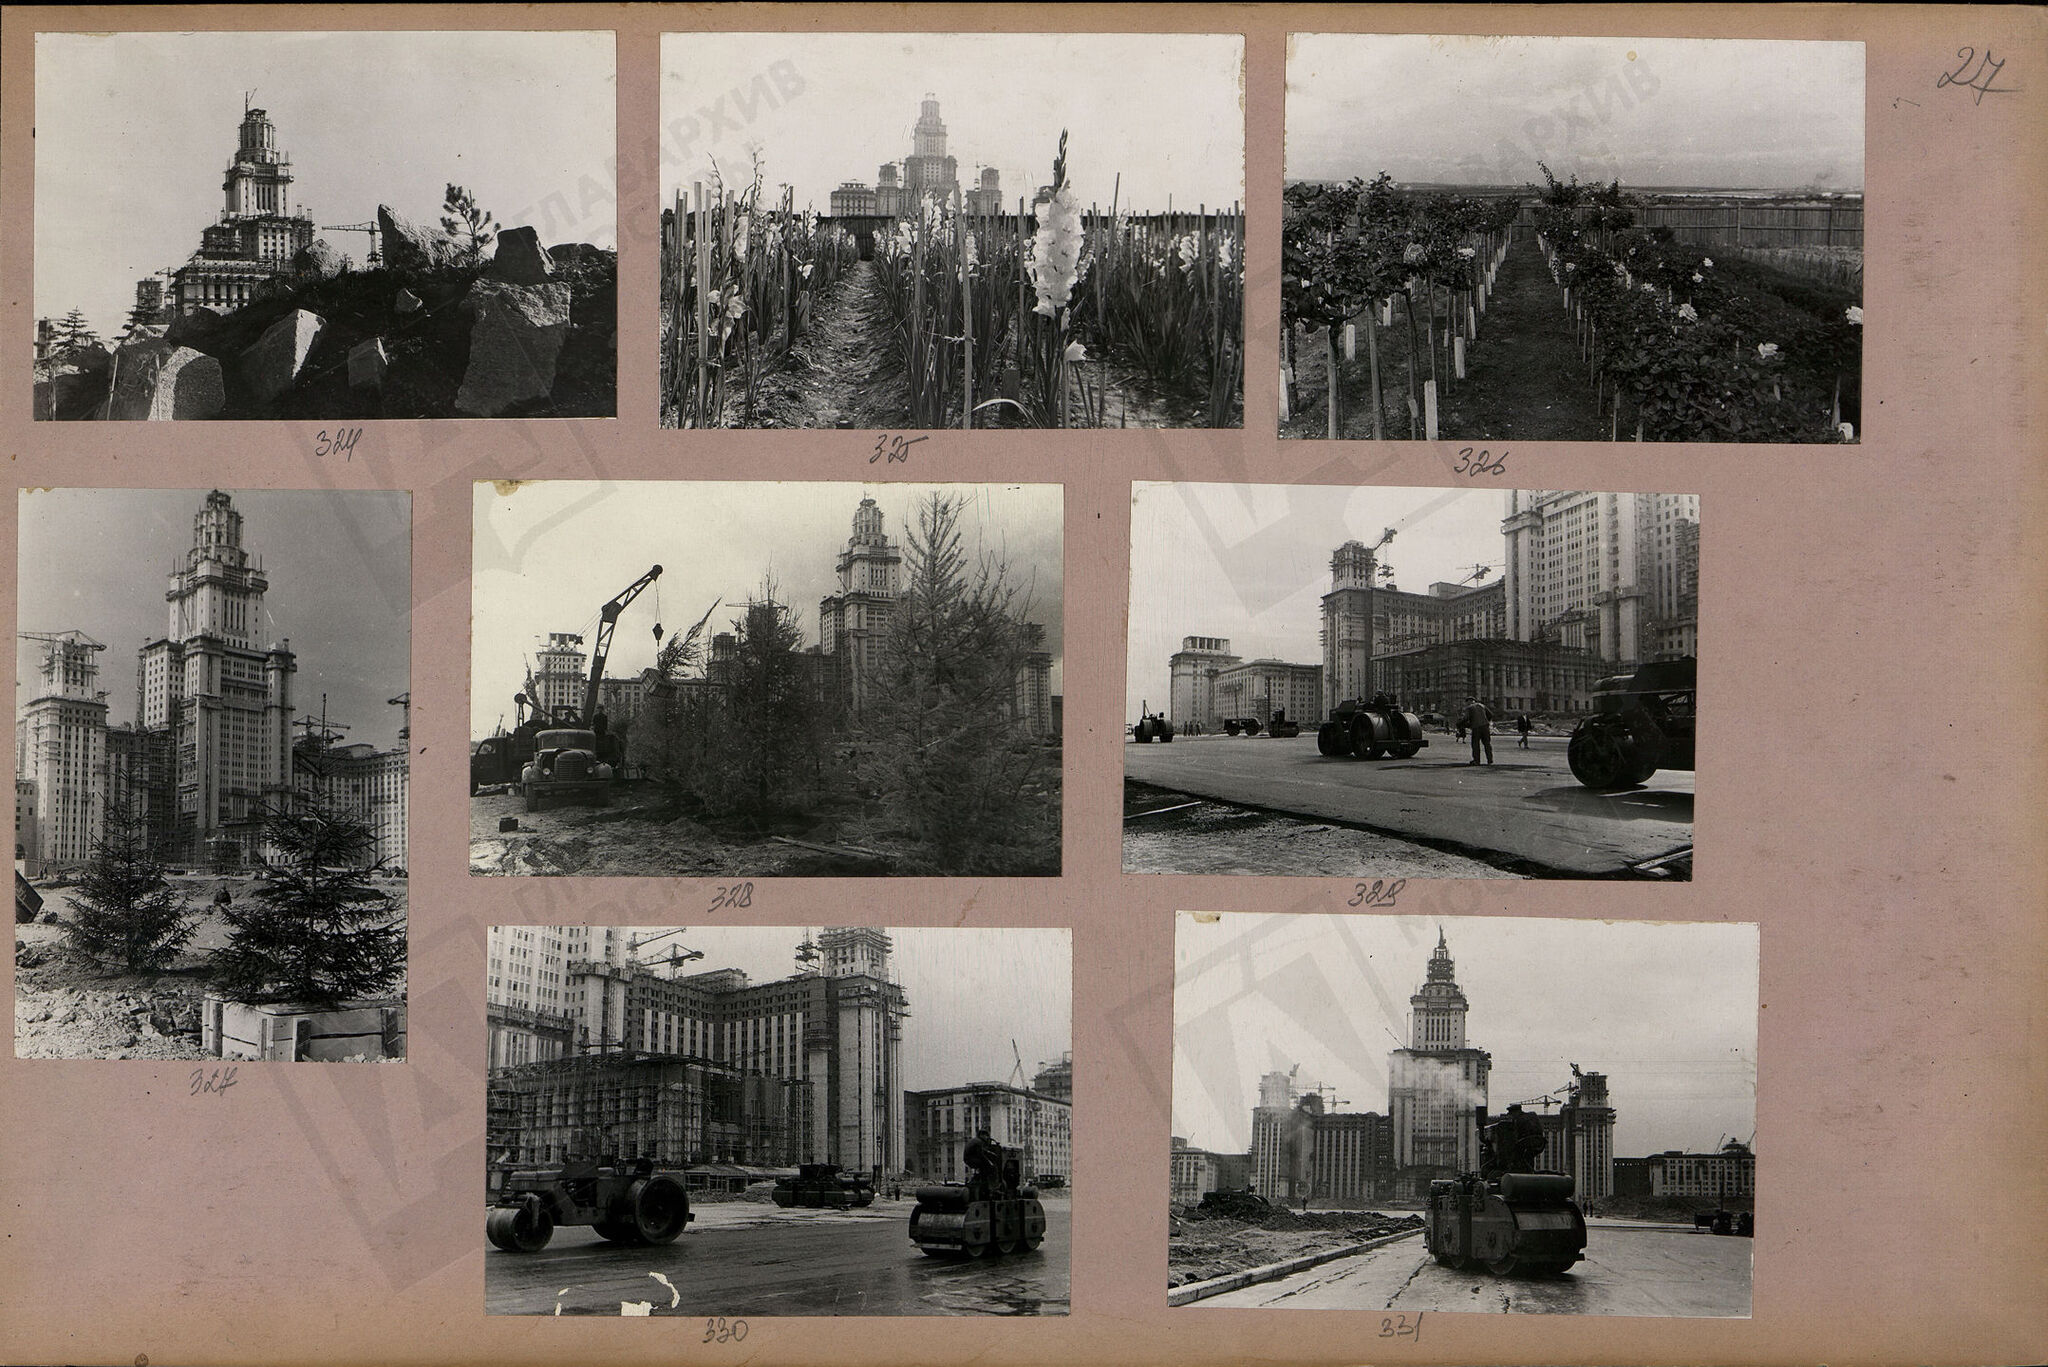 Construction of Moscow State University in photographs 1949-1951 - MSU, Building, The photo, Black and white photo, Moscow, Story, sights, Architecture, Historical photo, Longpost